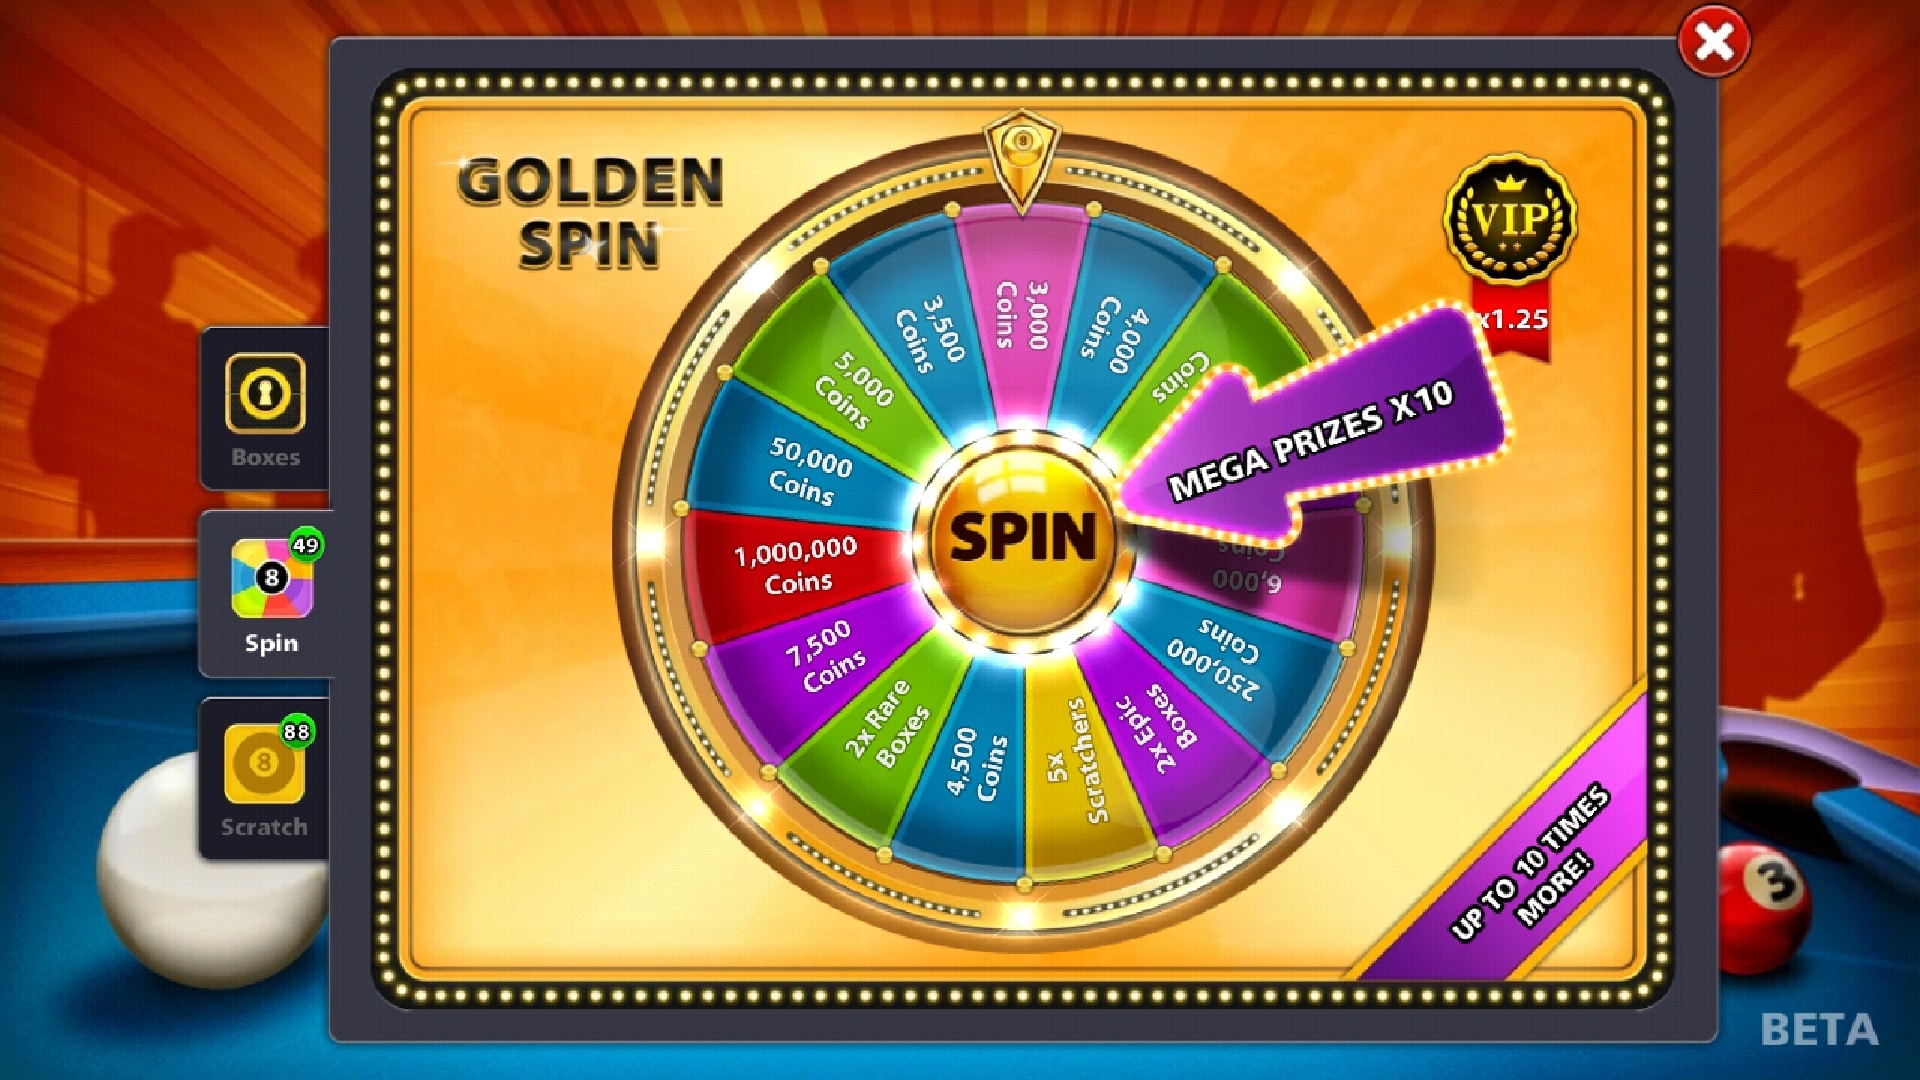 8 Ball Pool Free Golden Spin Reward (Link Updated Today)